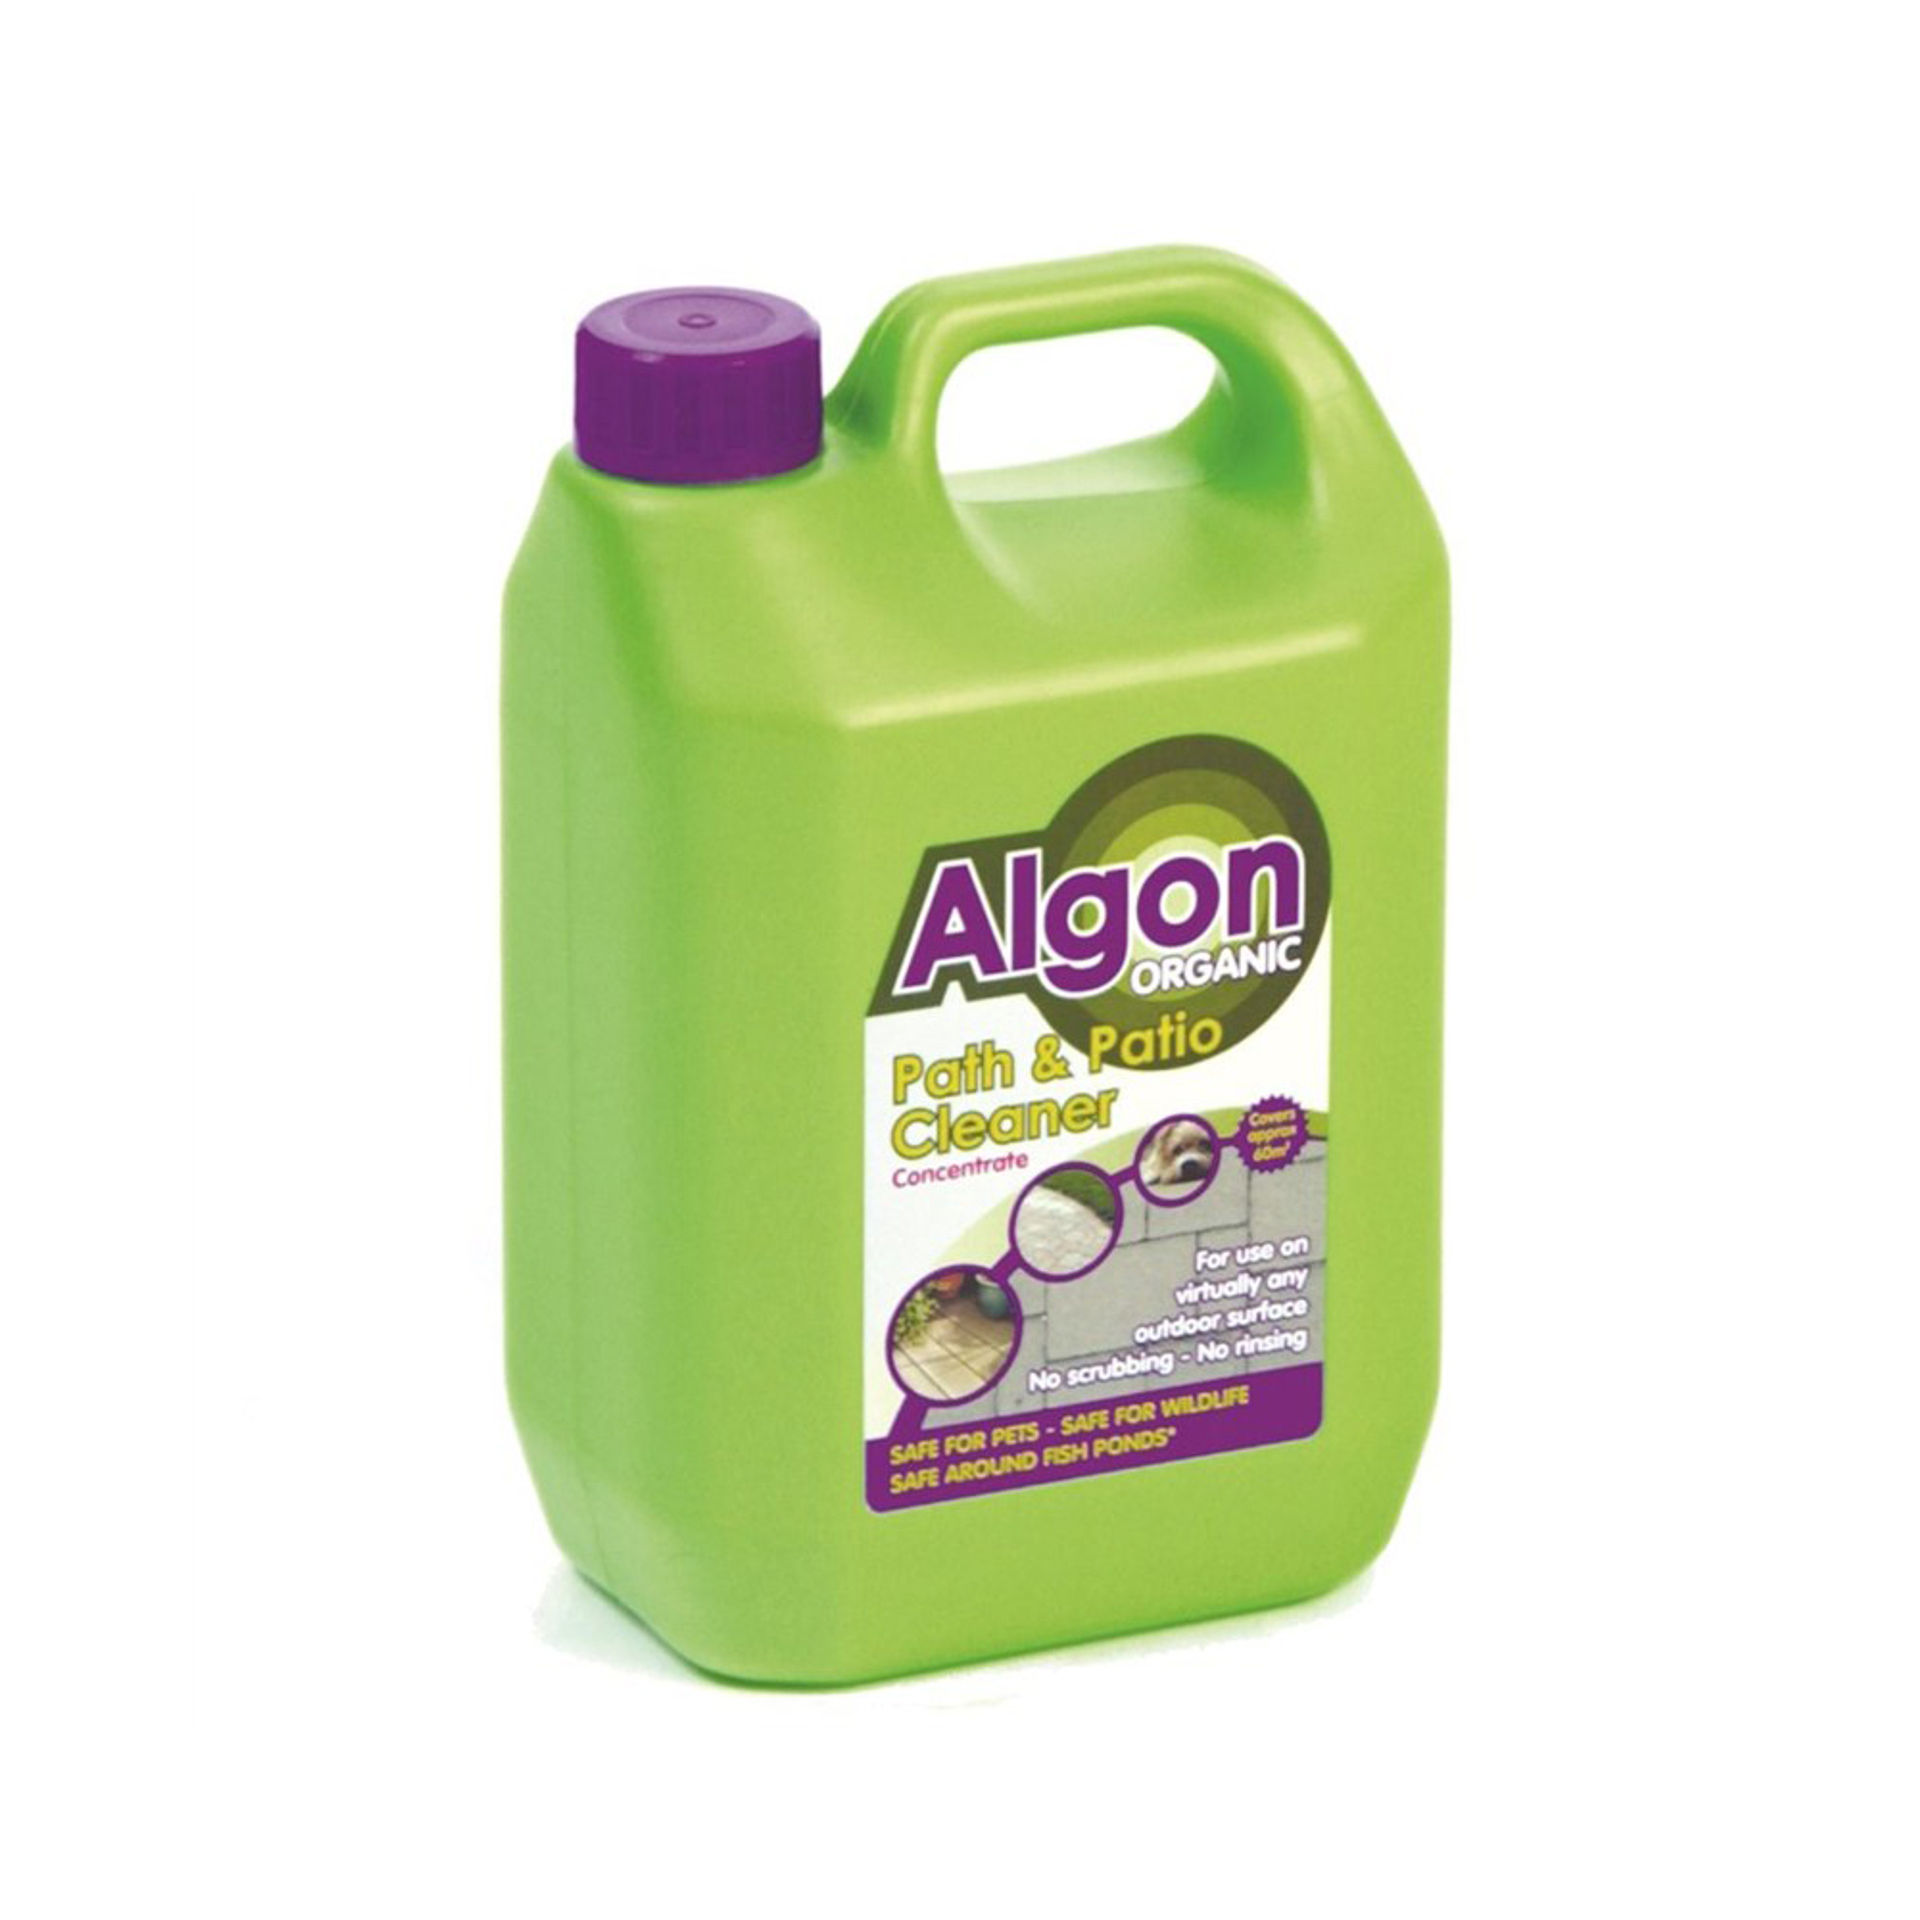 Algon Organic Path, Patio & Decking Cleaner Concentrate